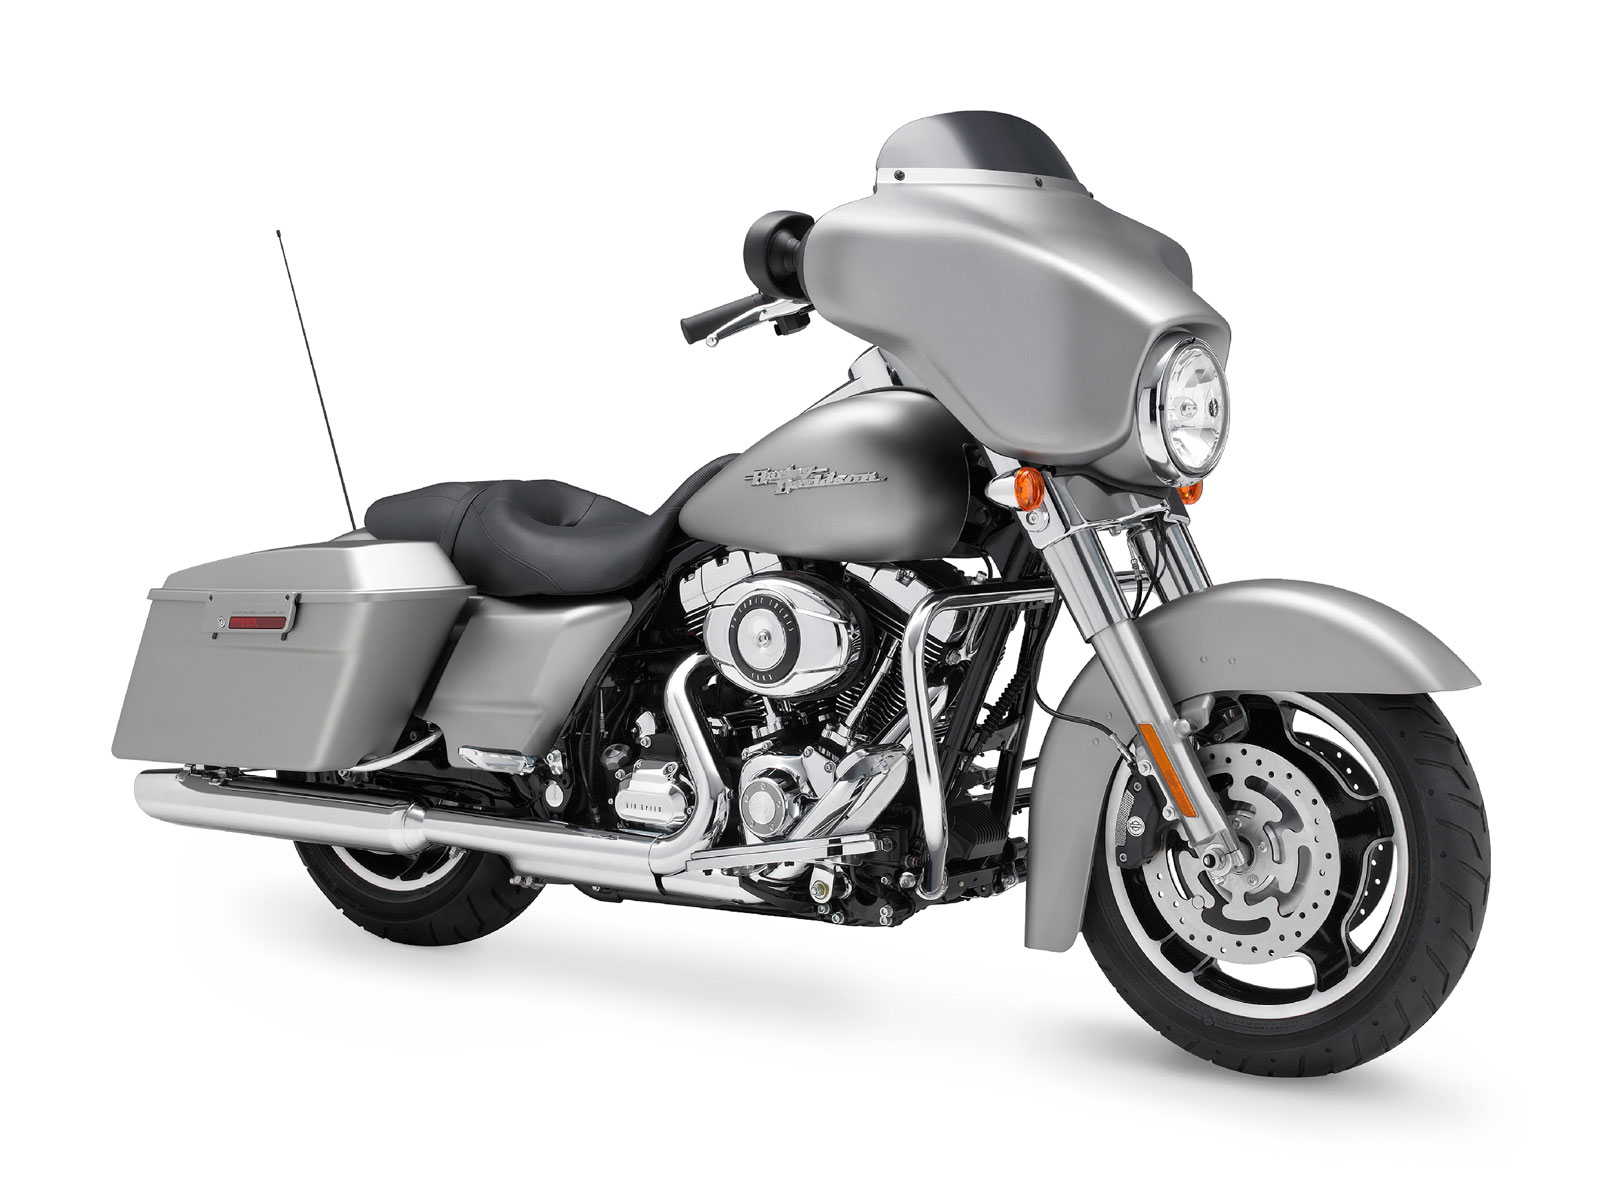 Amazing Harley-Davidson Street Glide Pictures & Backgrounds